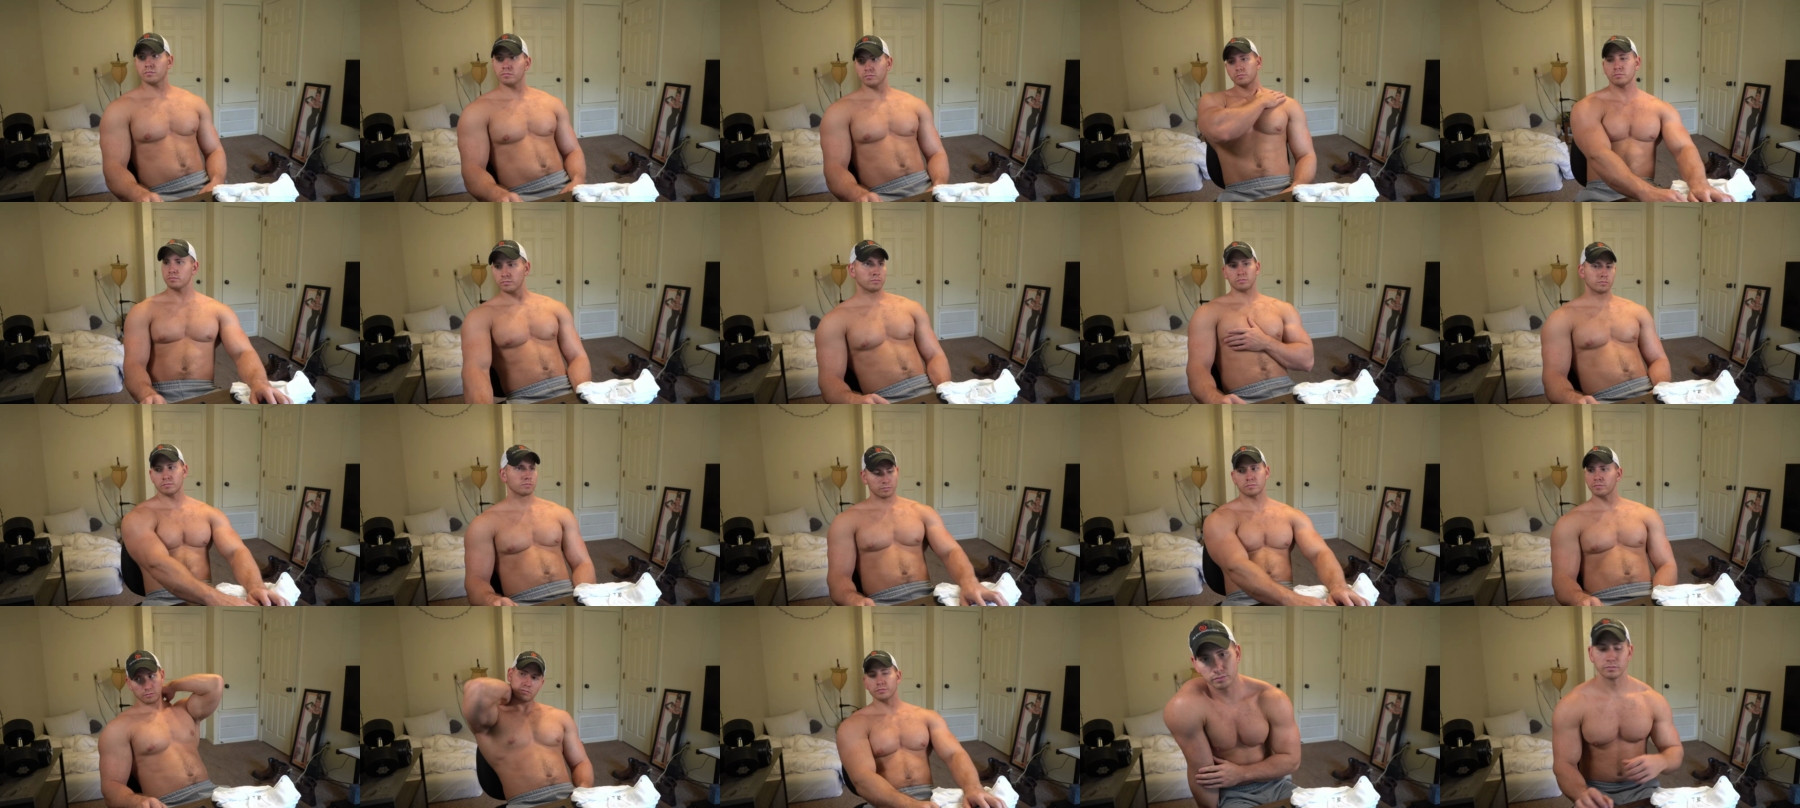 Hotmuscles6t9  20-04-2021 Male Porn